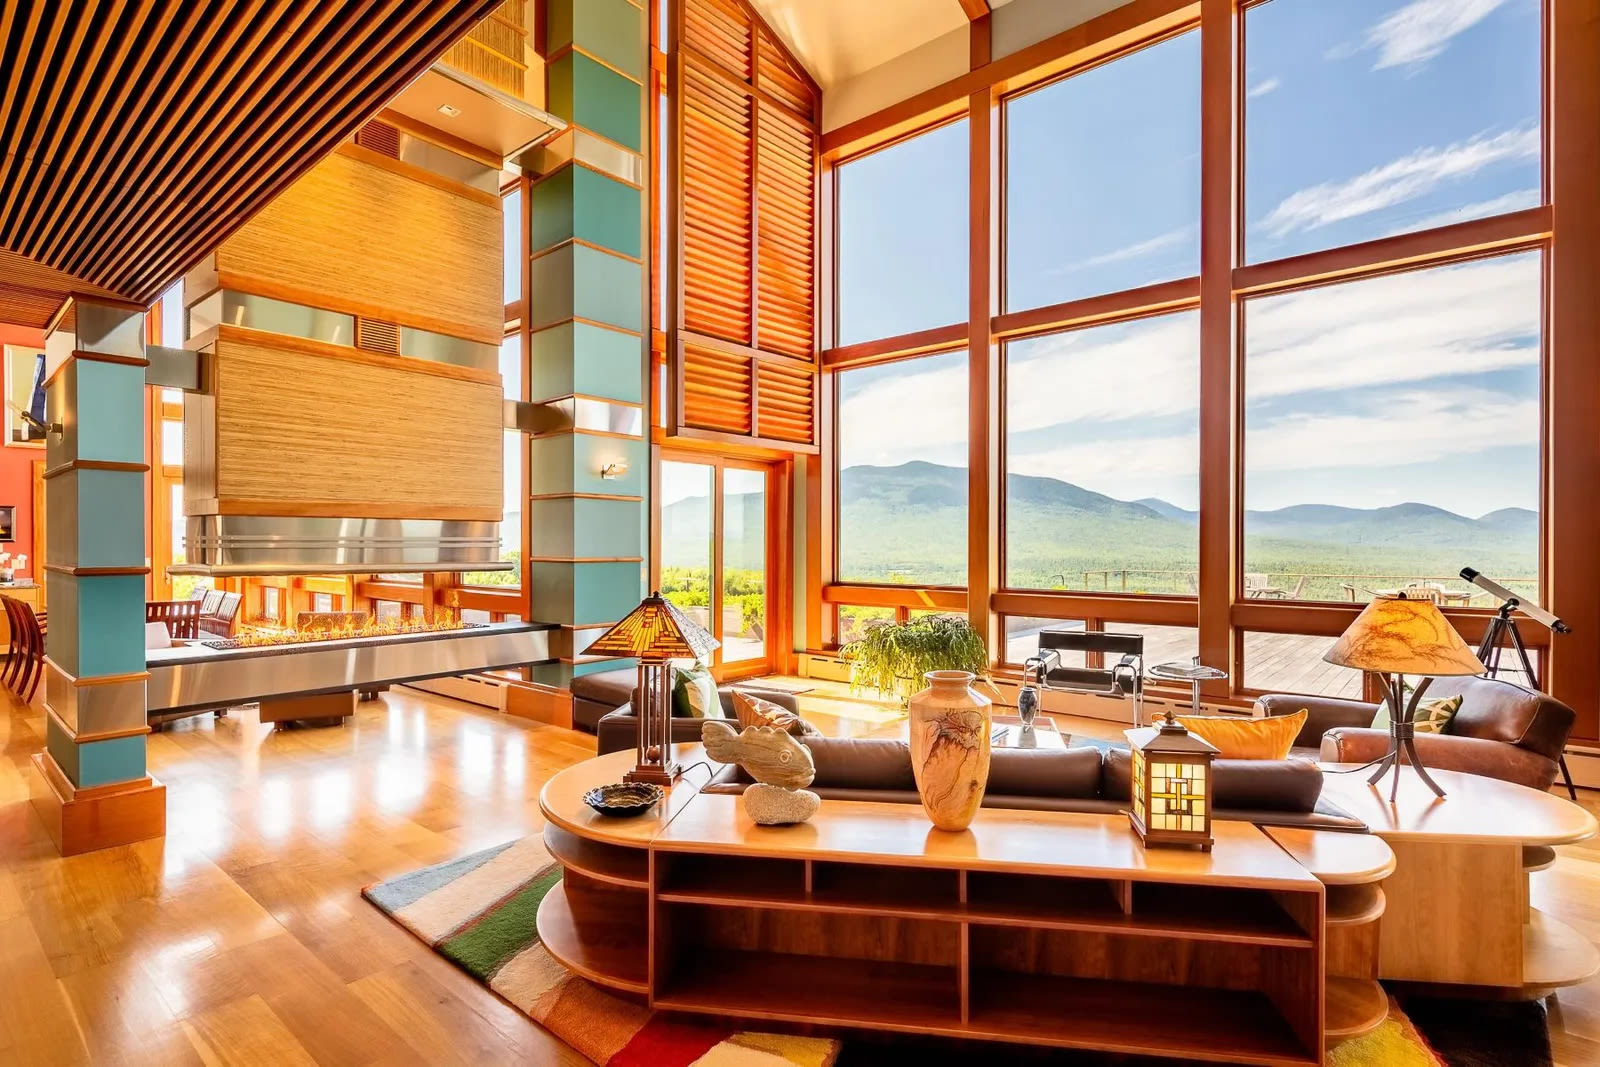 This $5M rural Maine mansion was built as an homage to Frank Lloyd Wright